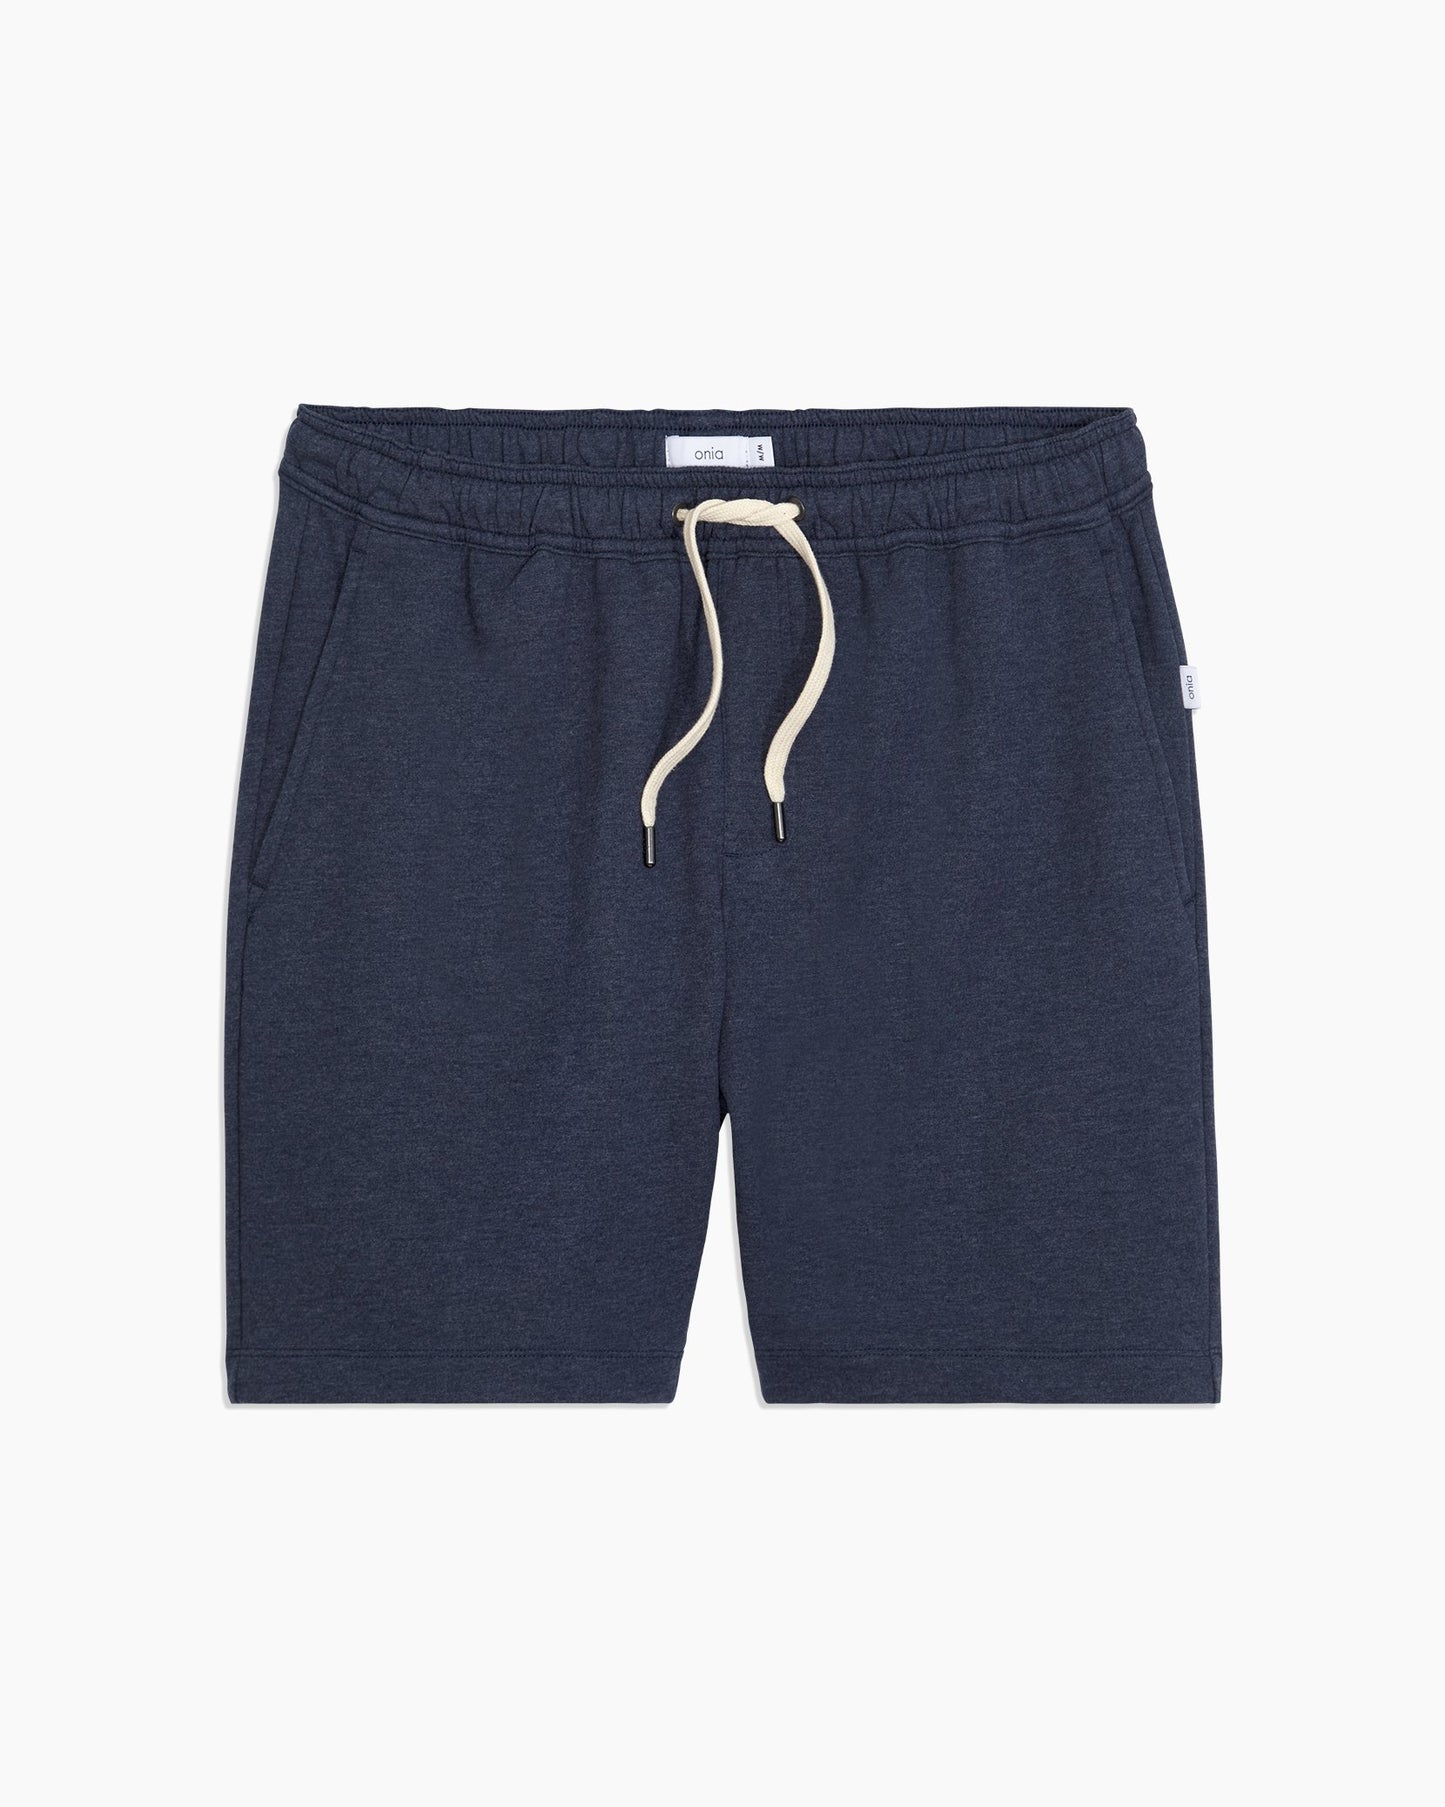 HEATHERED FRENCH TERRY SHORT